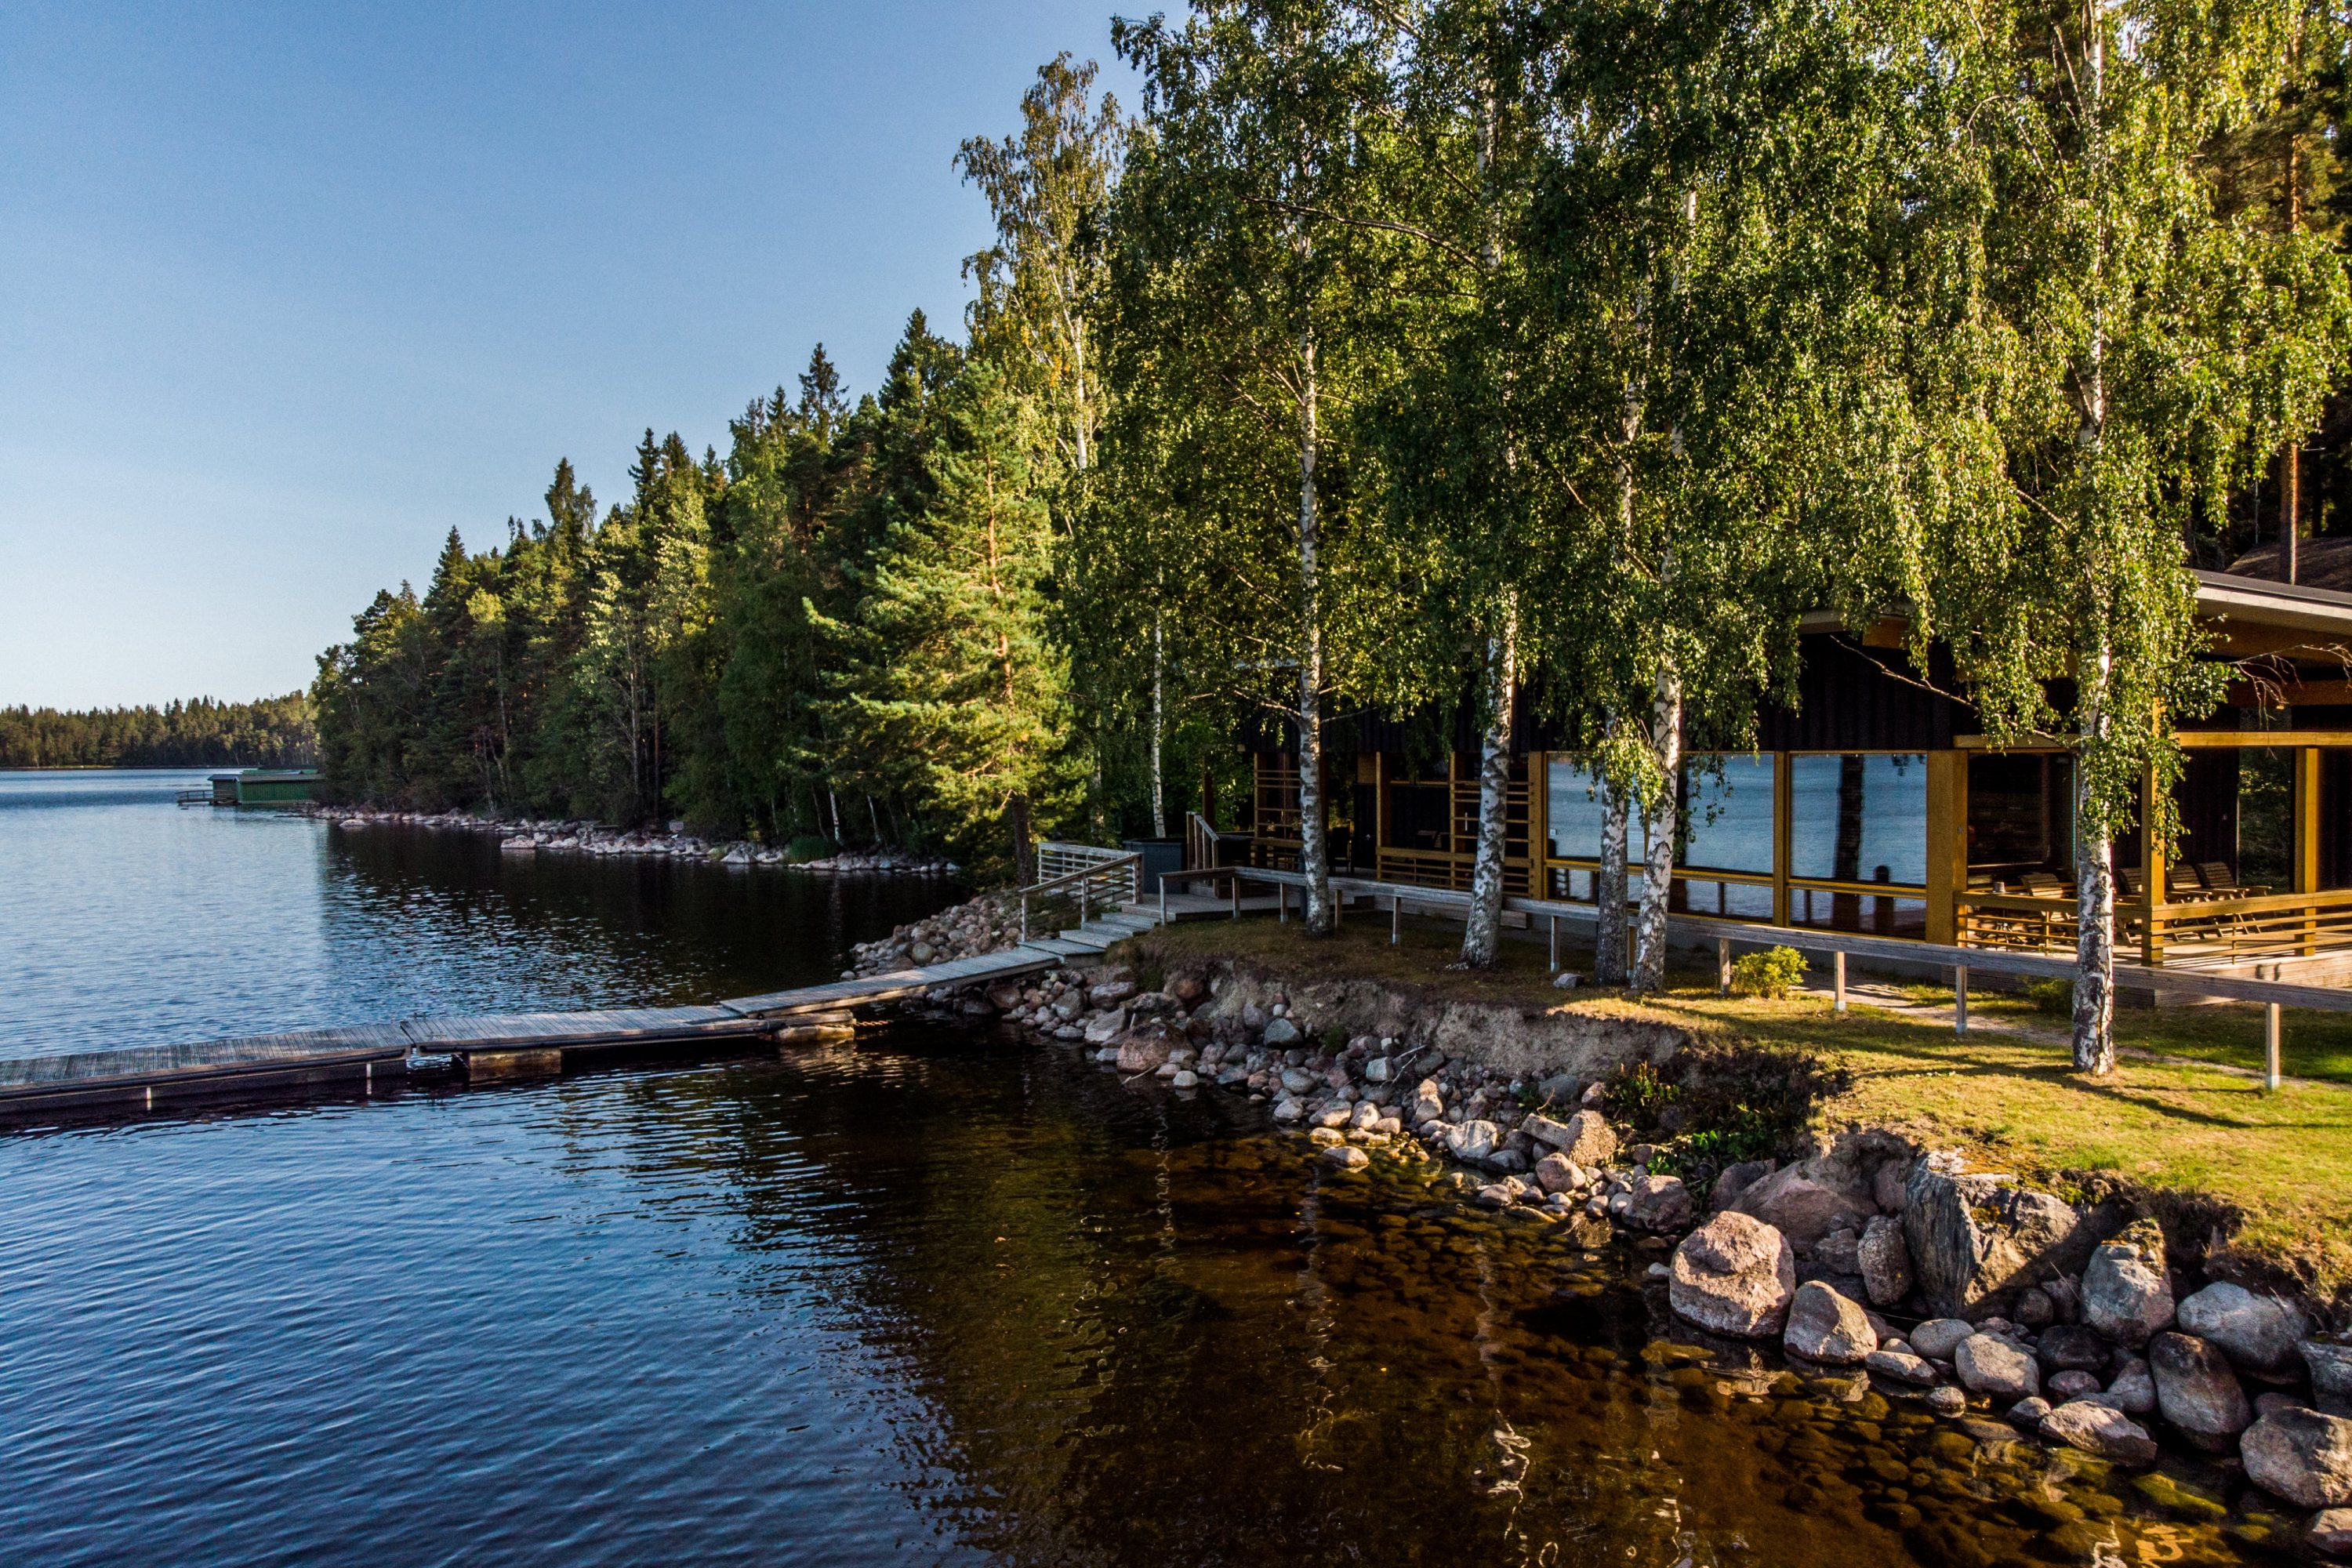 A sauna cottage by the lake